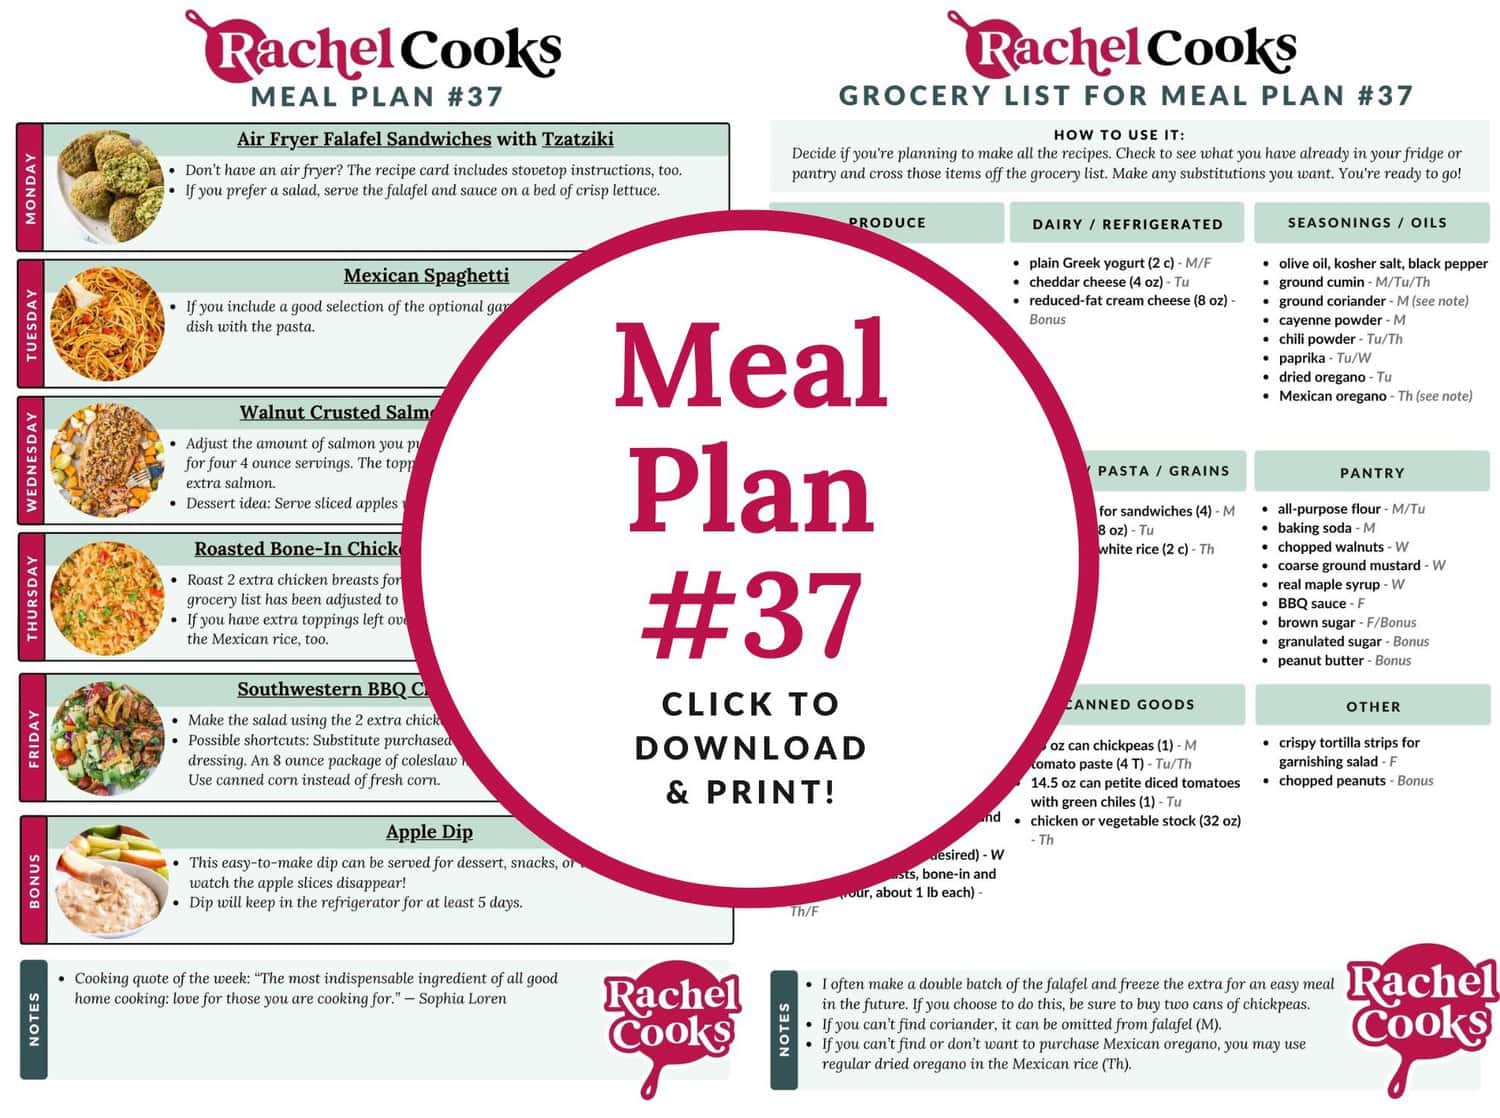 Meal plan 37 preview image.